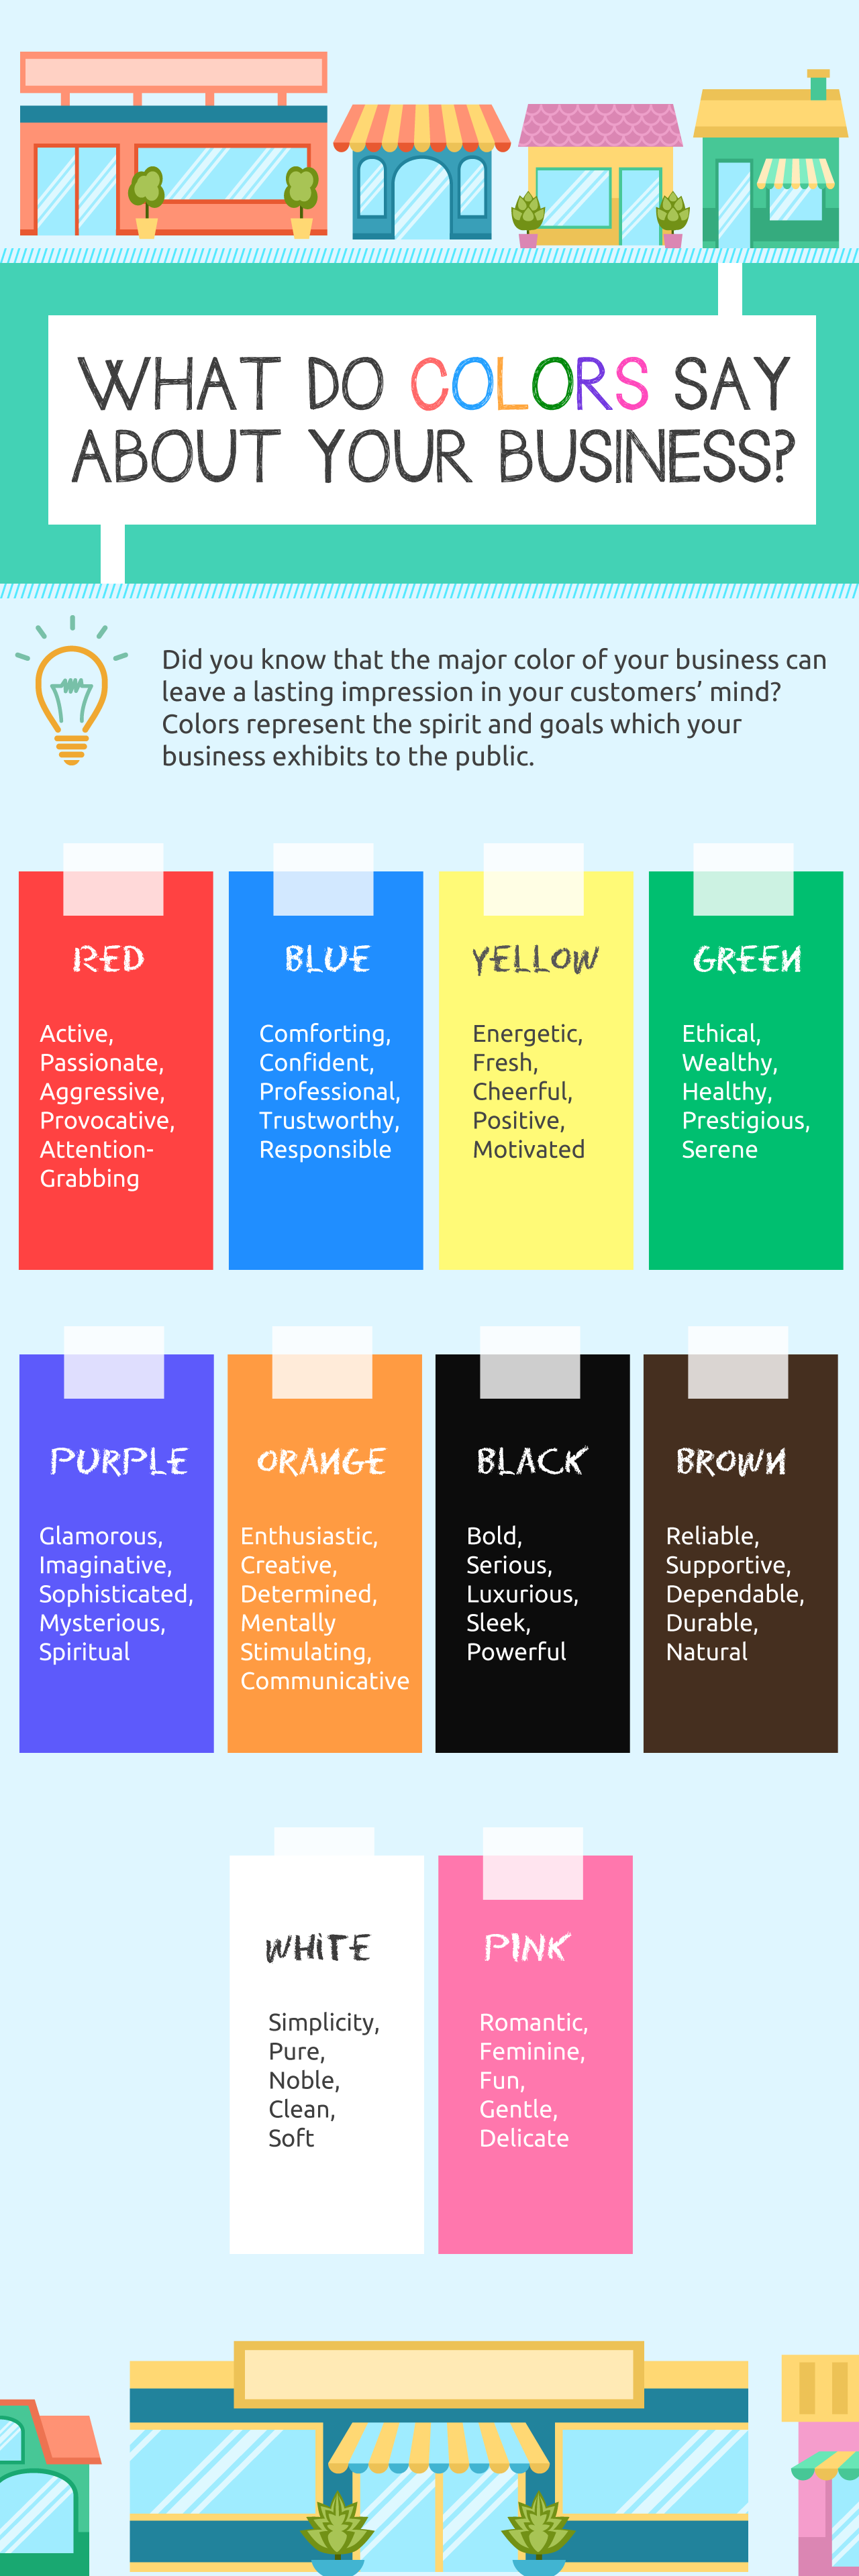 What Do Colors Say About Your Business?